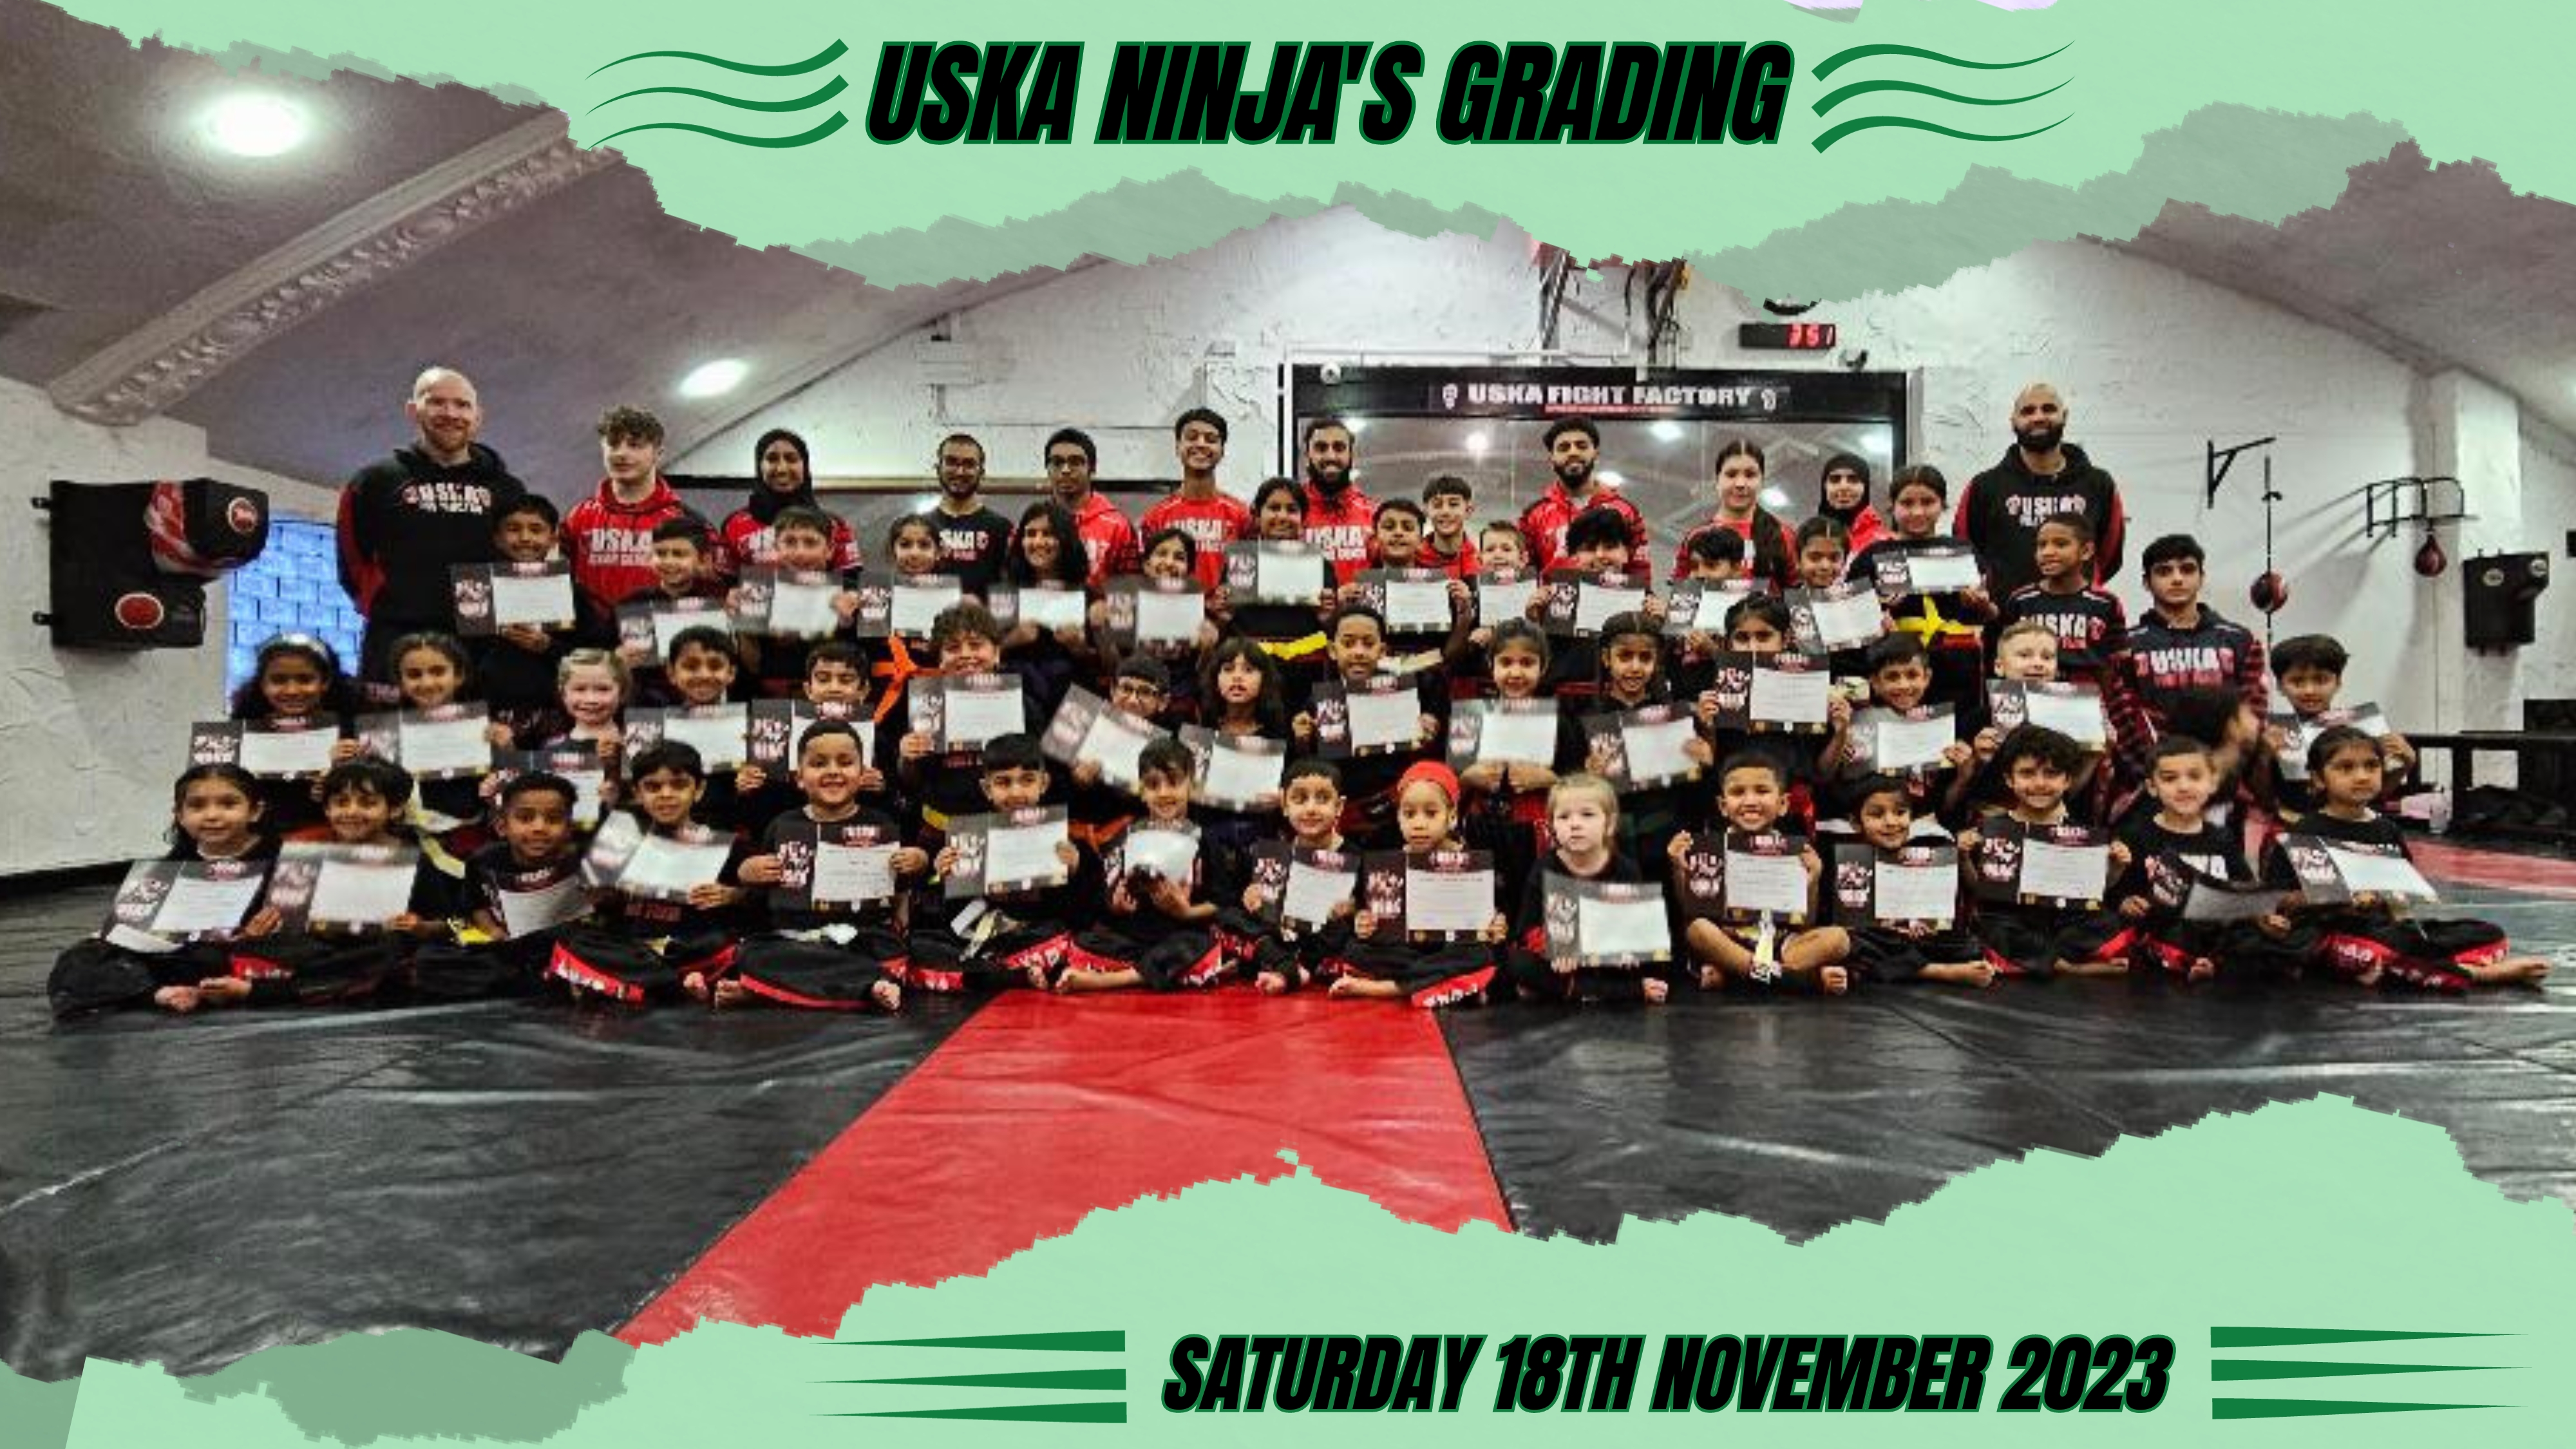 18-11-23 - Last Ninja's Grading of the year and all of our Ninja's were amazing!